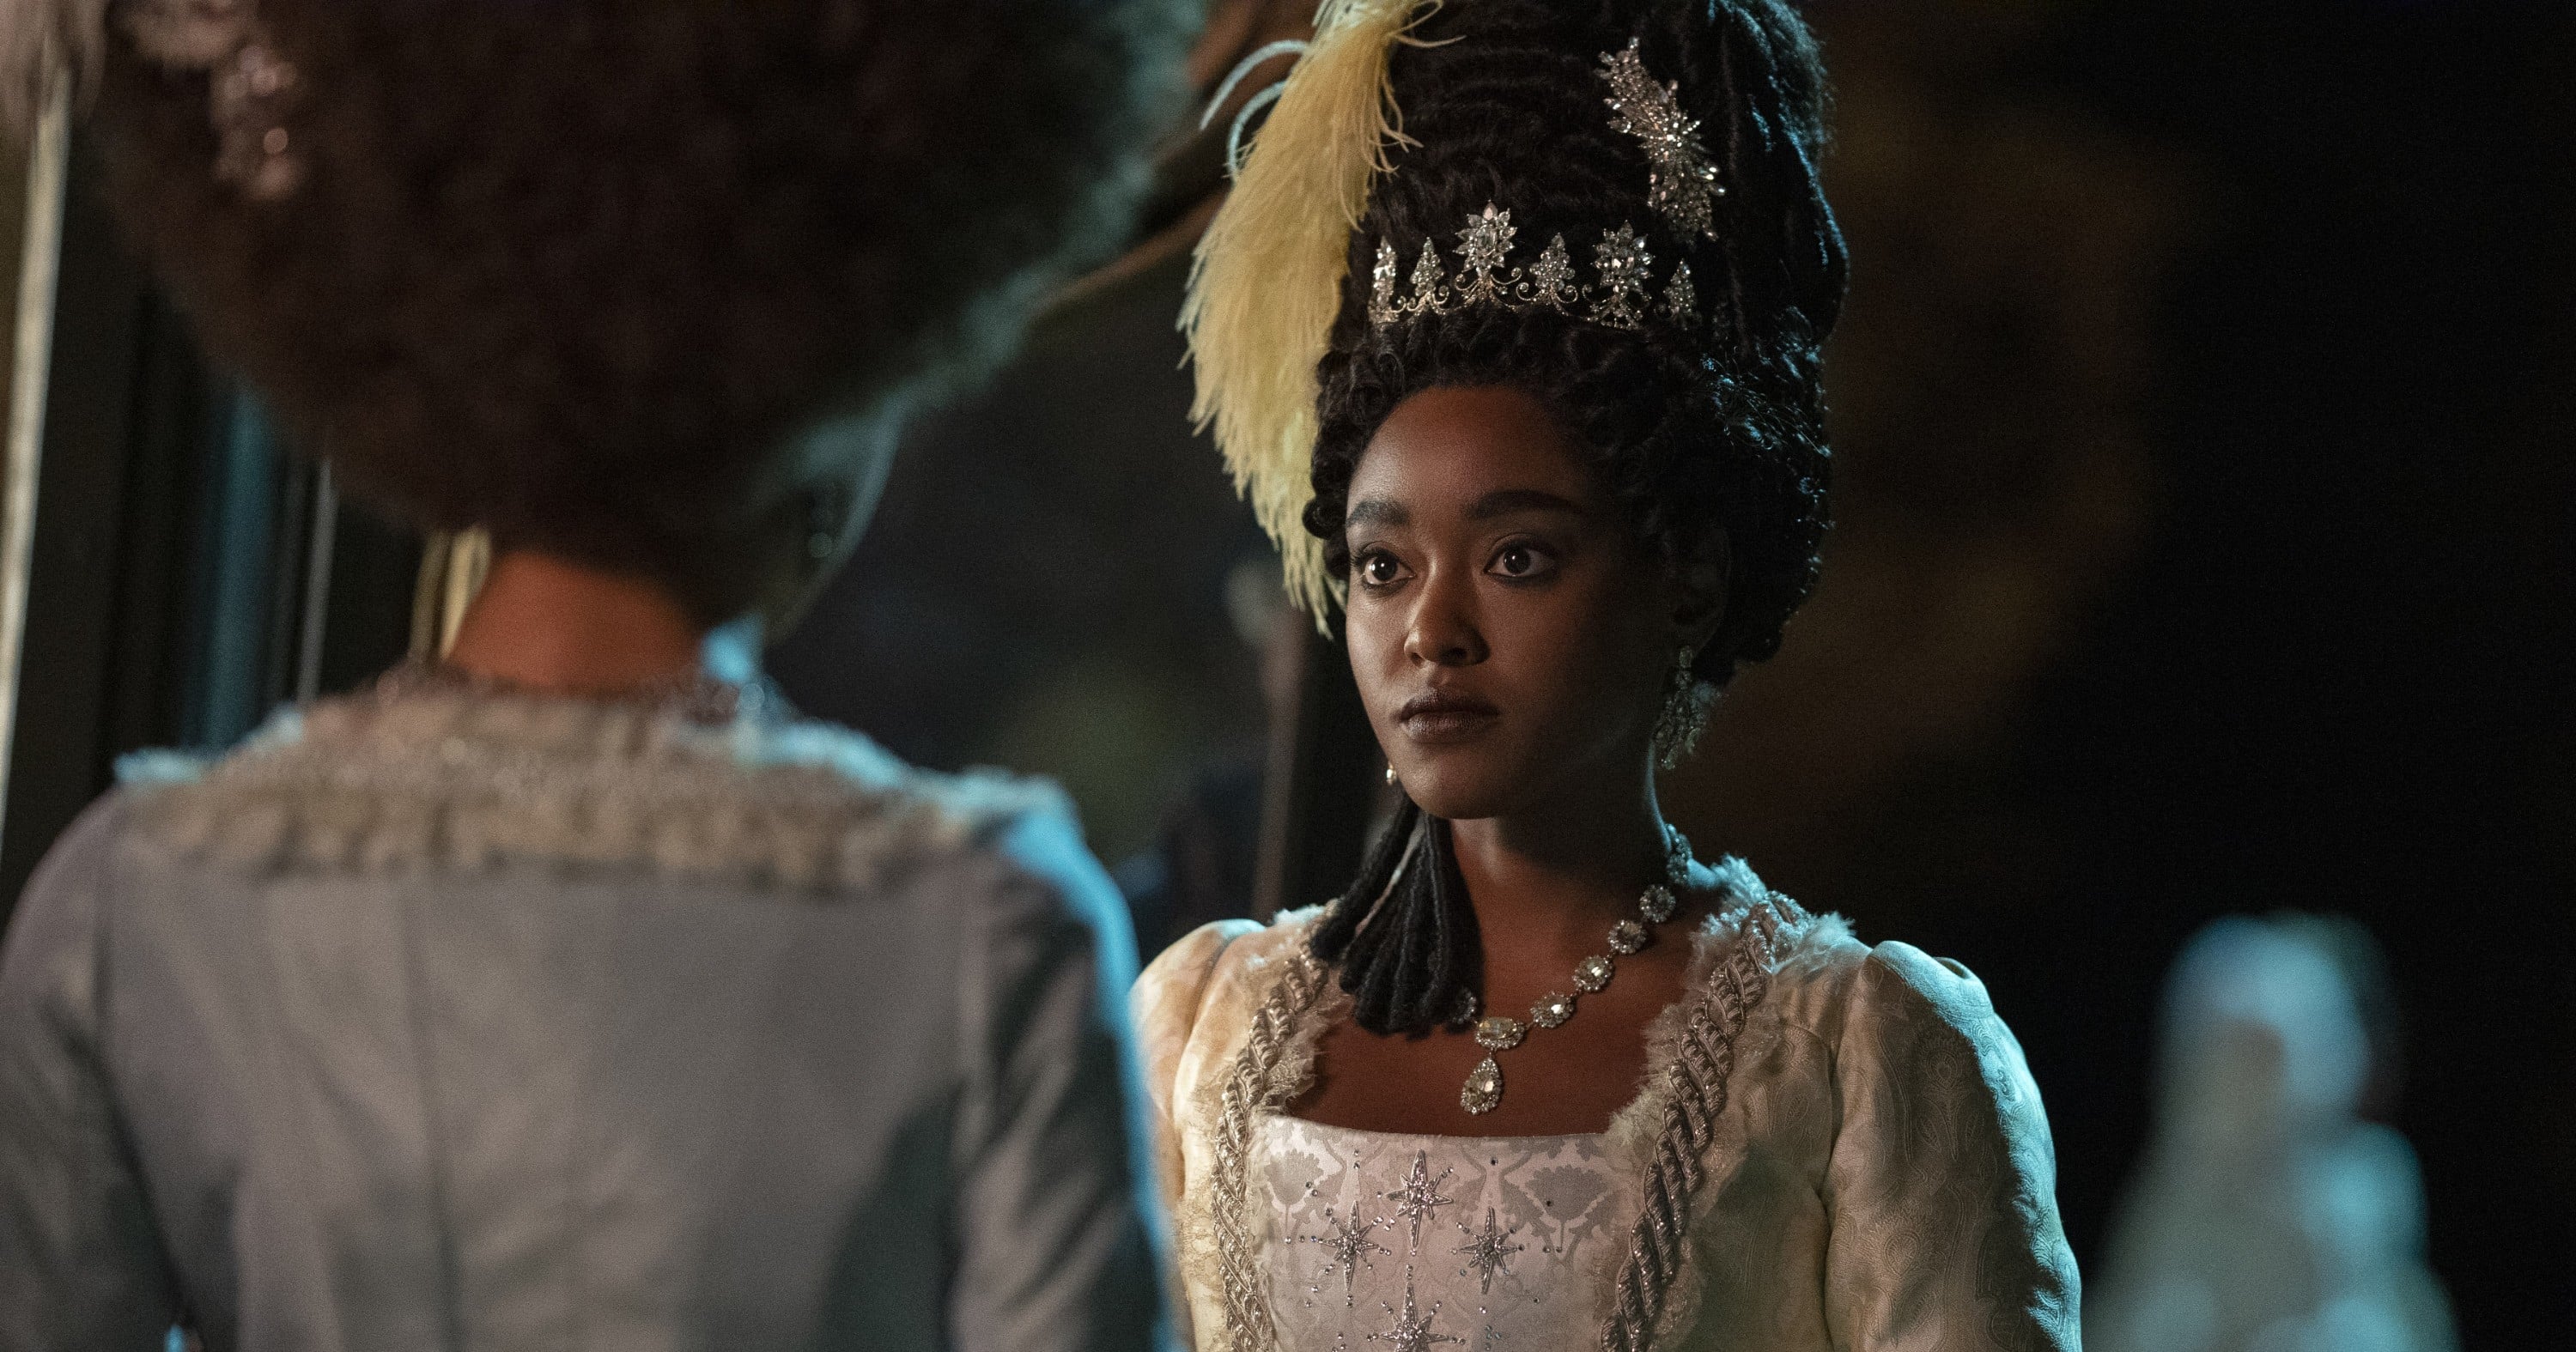 Queen Charlotte: TV Show vs. Book Differences